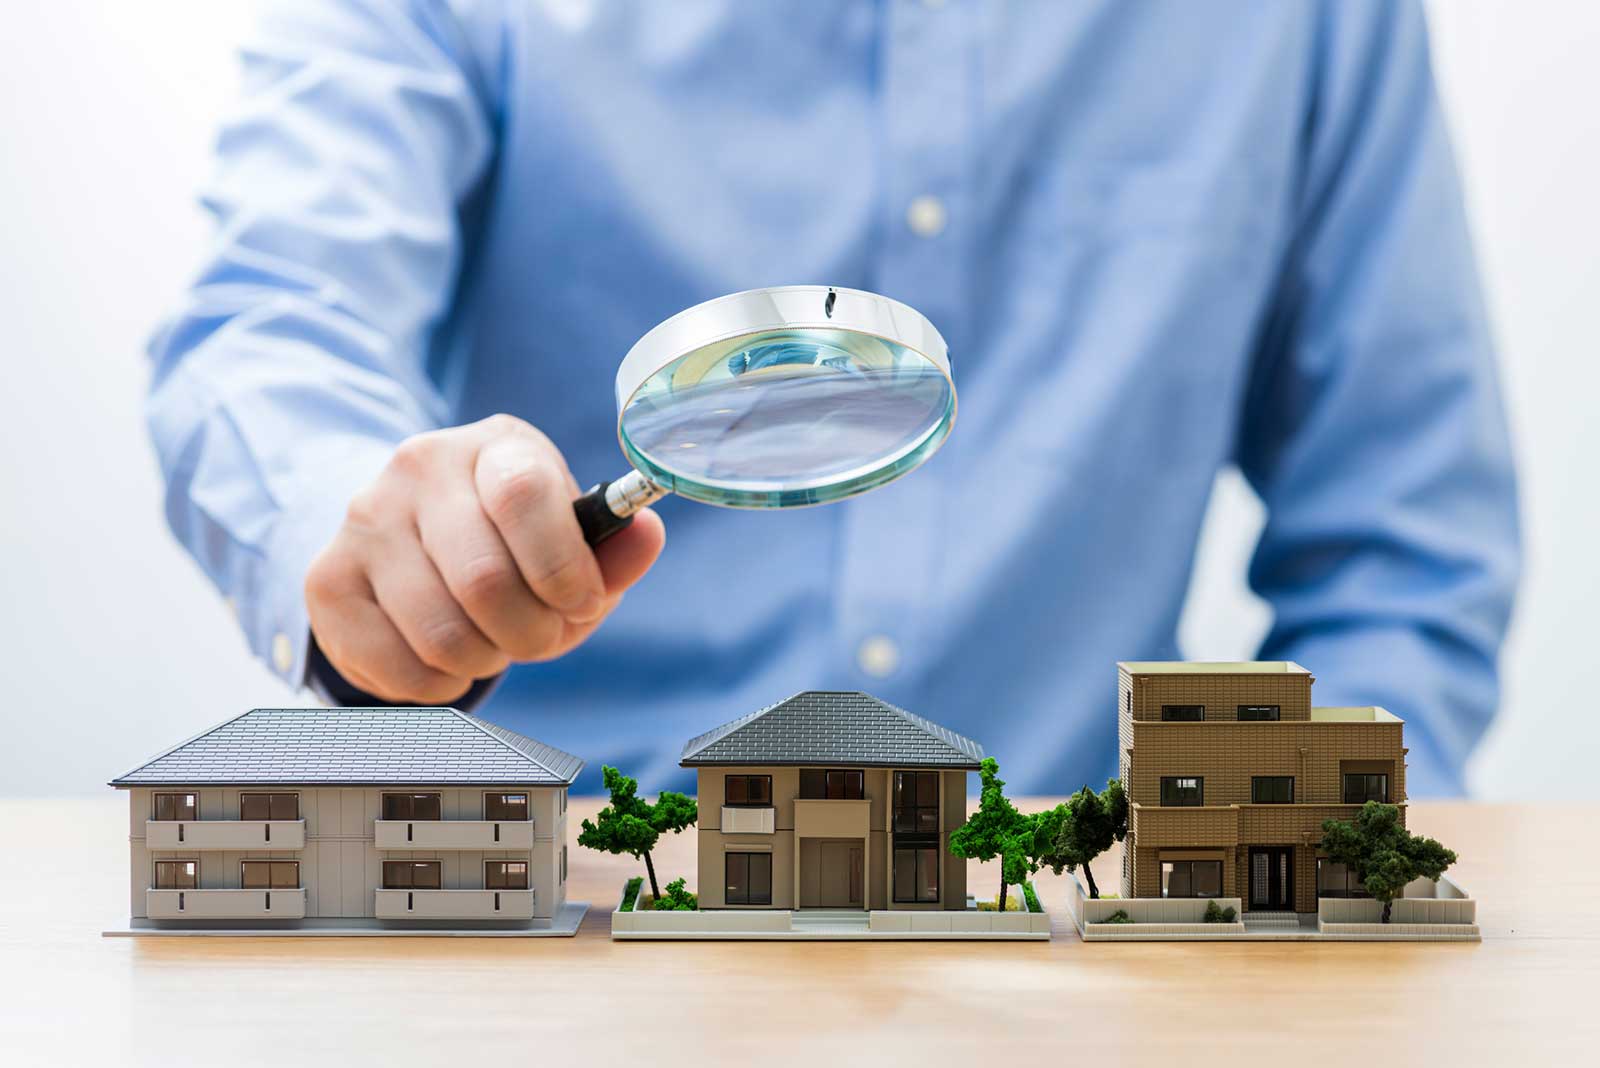 Man holding magnifying glass over model home depicting title search for property 